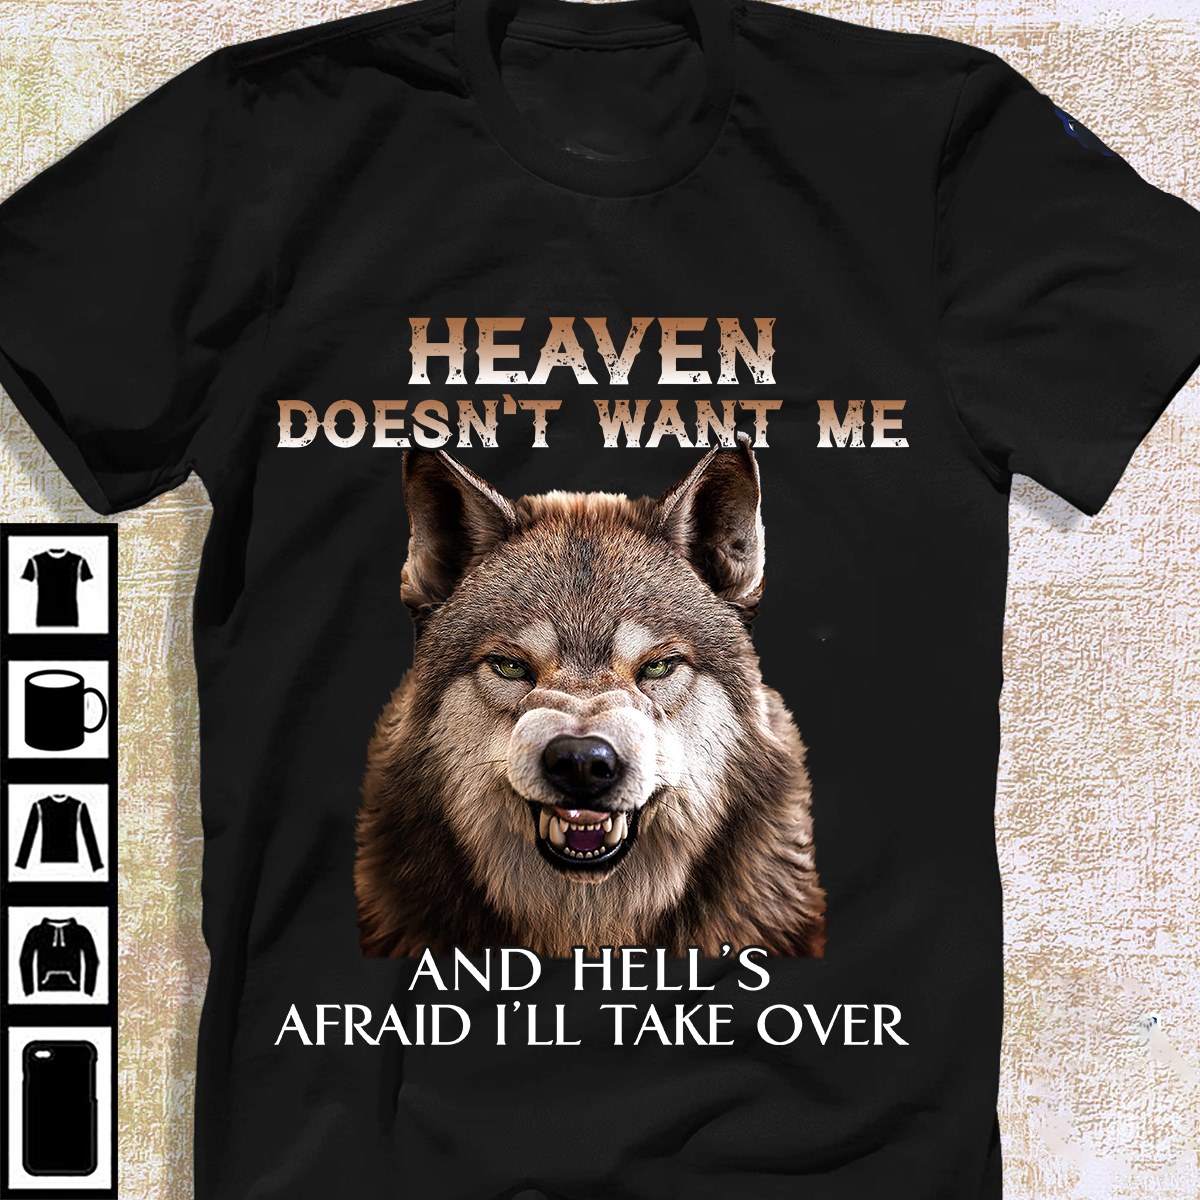 Heaven doesn't want me and hell's afraid I'll take over - Angry wolf